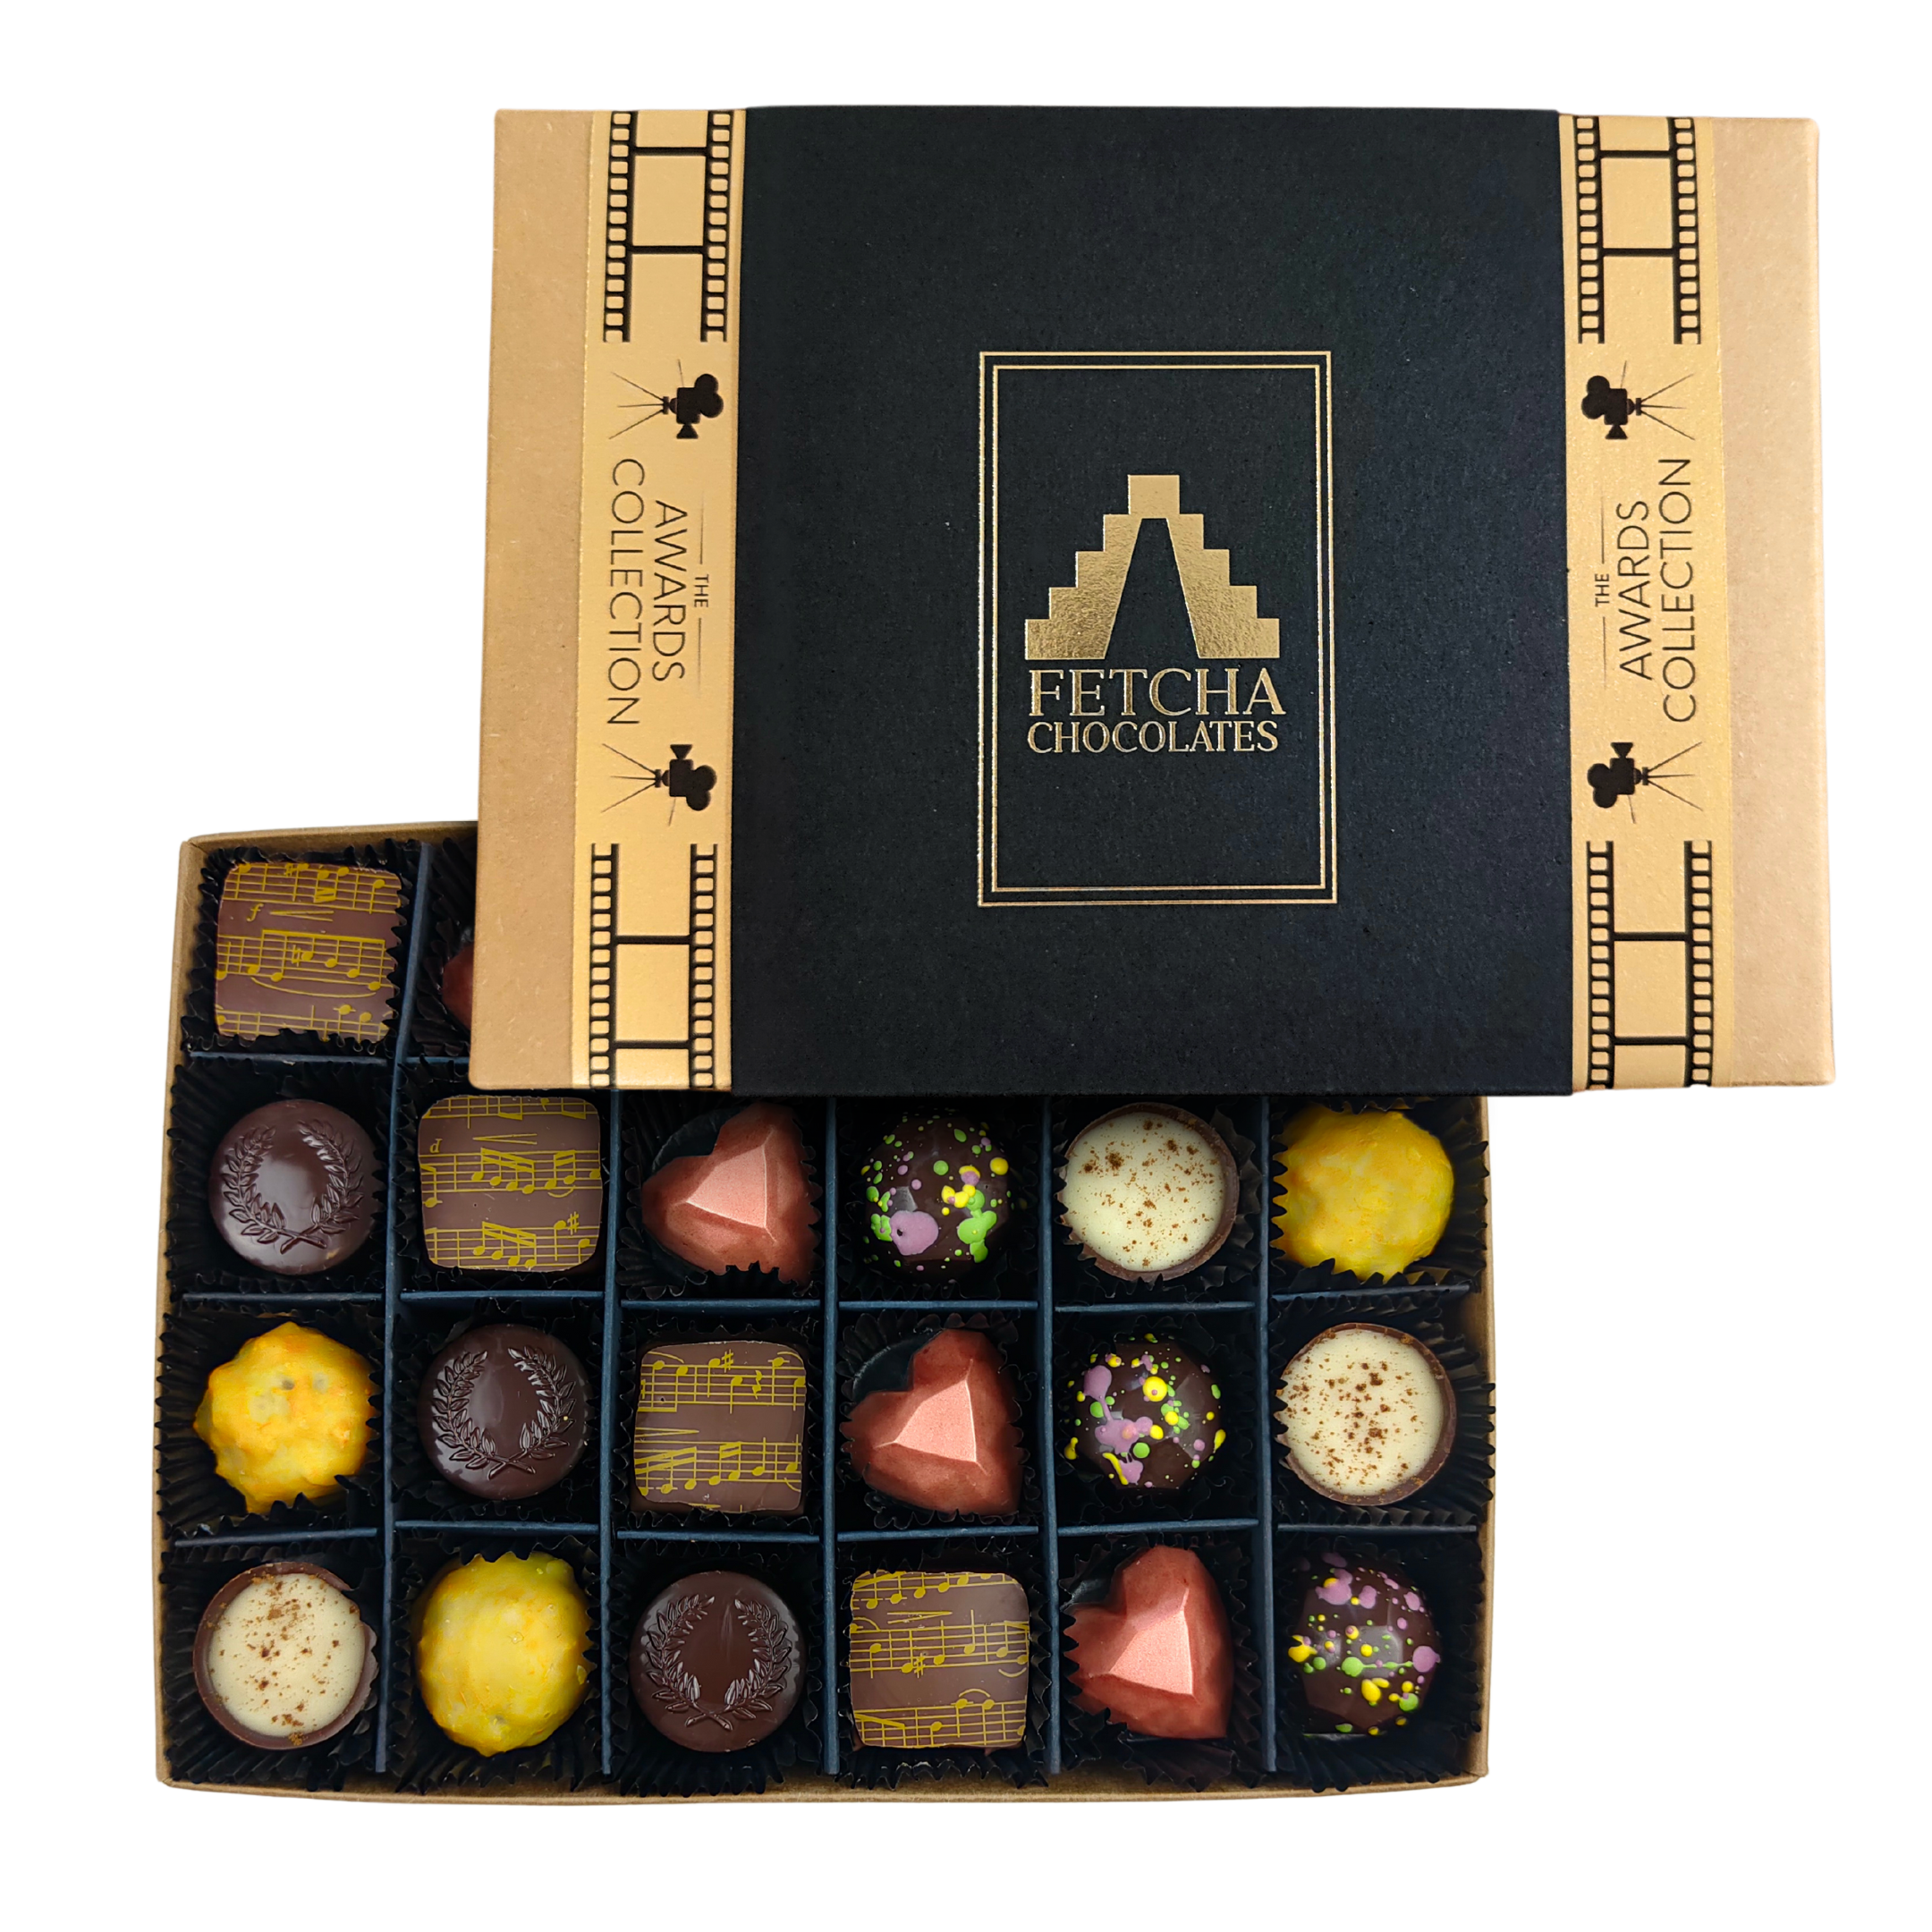 Large box of 24 vegan chocolates in different colours and designs. Box says "Awards Collection" and is kraft brown with a black and gold Fetcha Chocolates branded sleeve